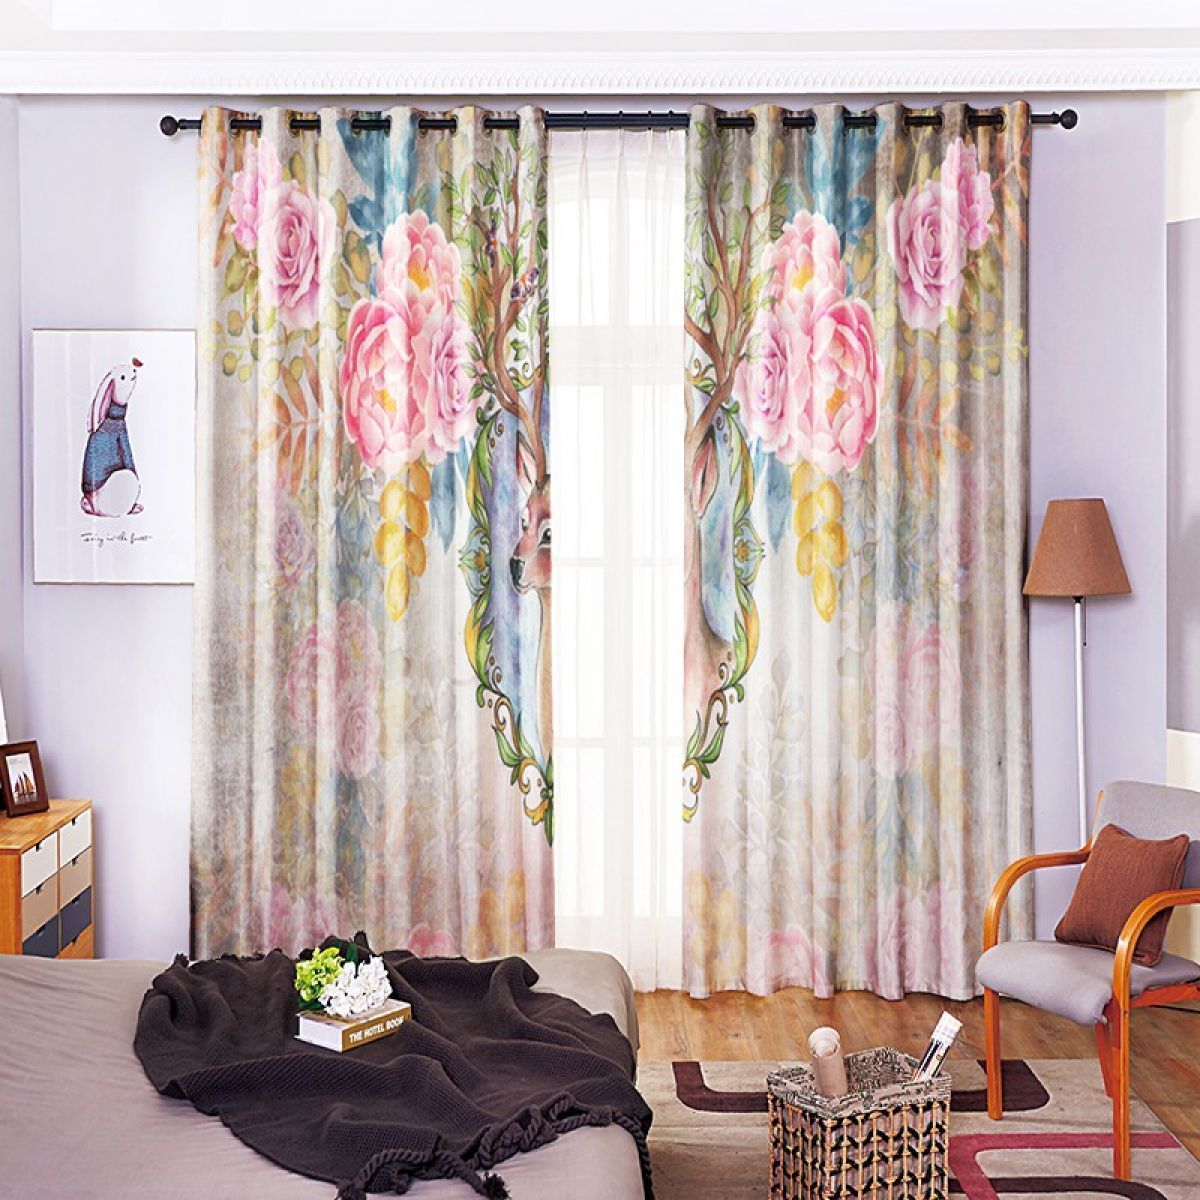 3d Deer And Pink Flower Printed Window Curtain Home Decor